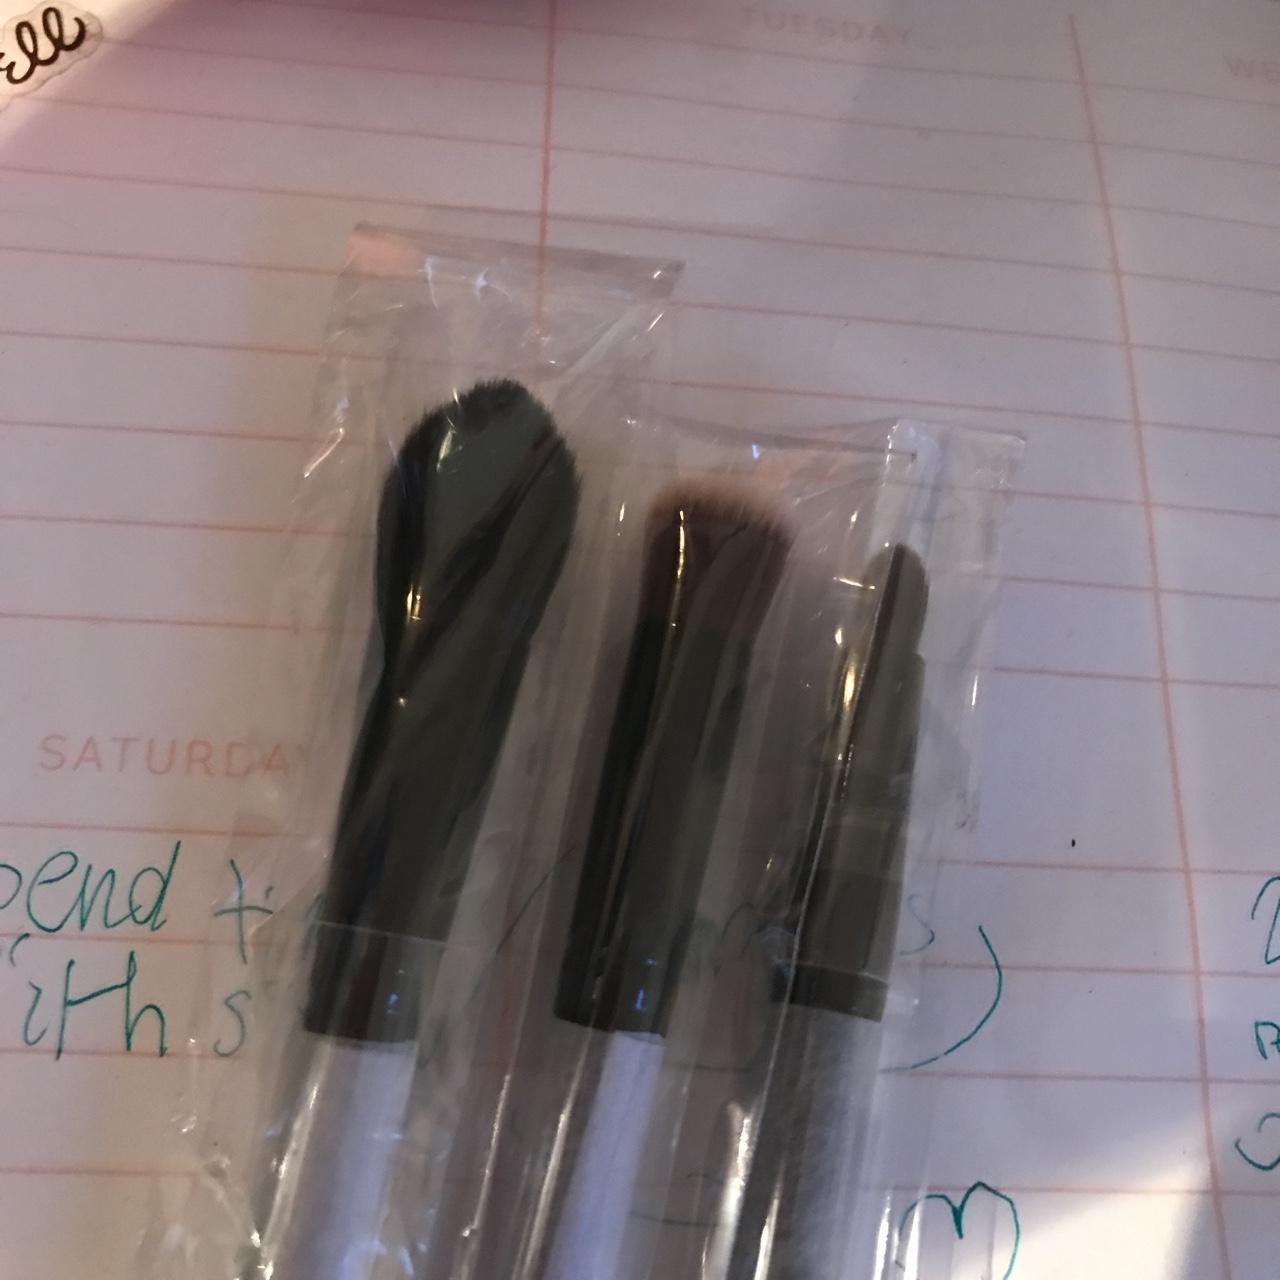 Product Image 2 - Kevyn Aucoin Brushes. Brand new!